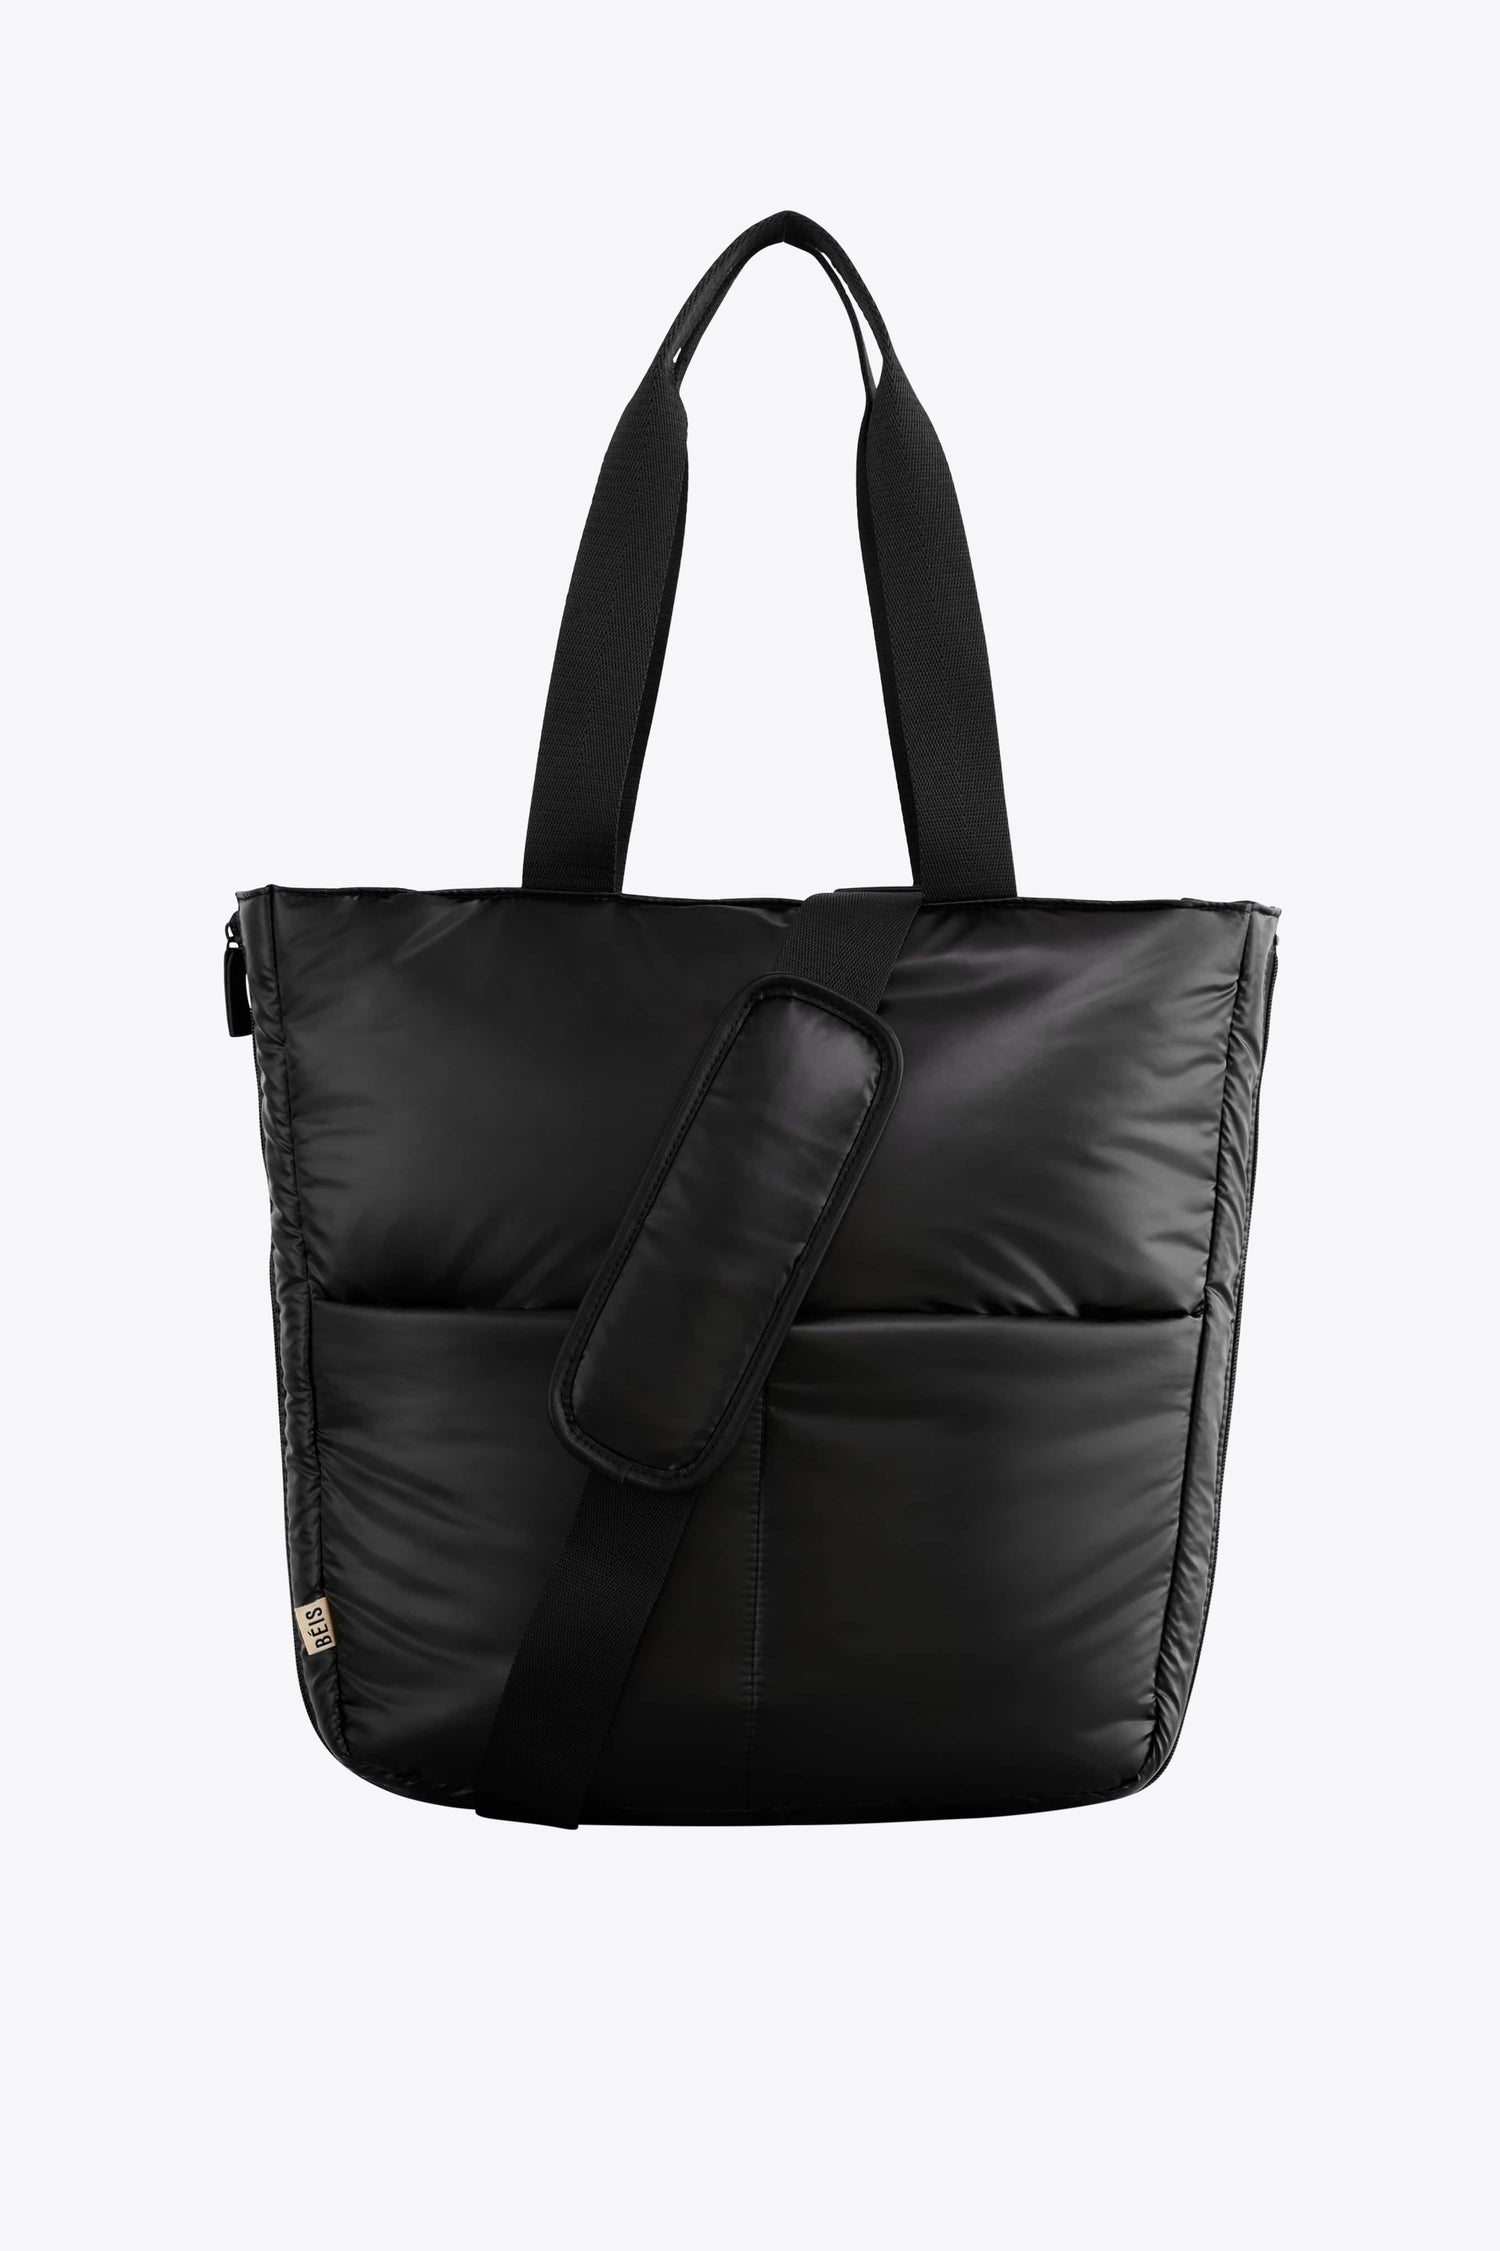 The Expandable Tote